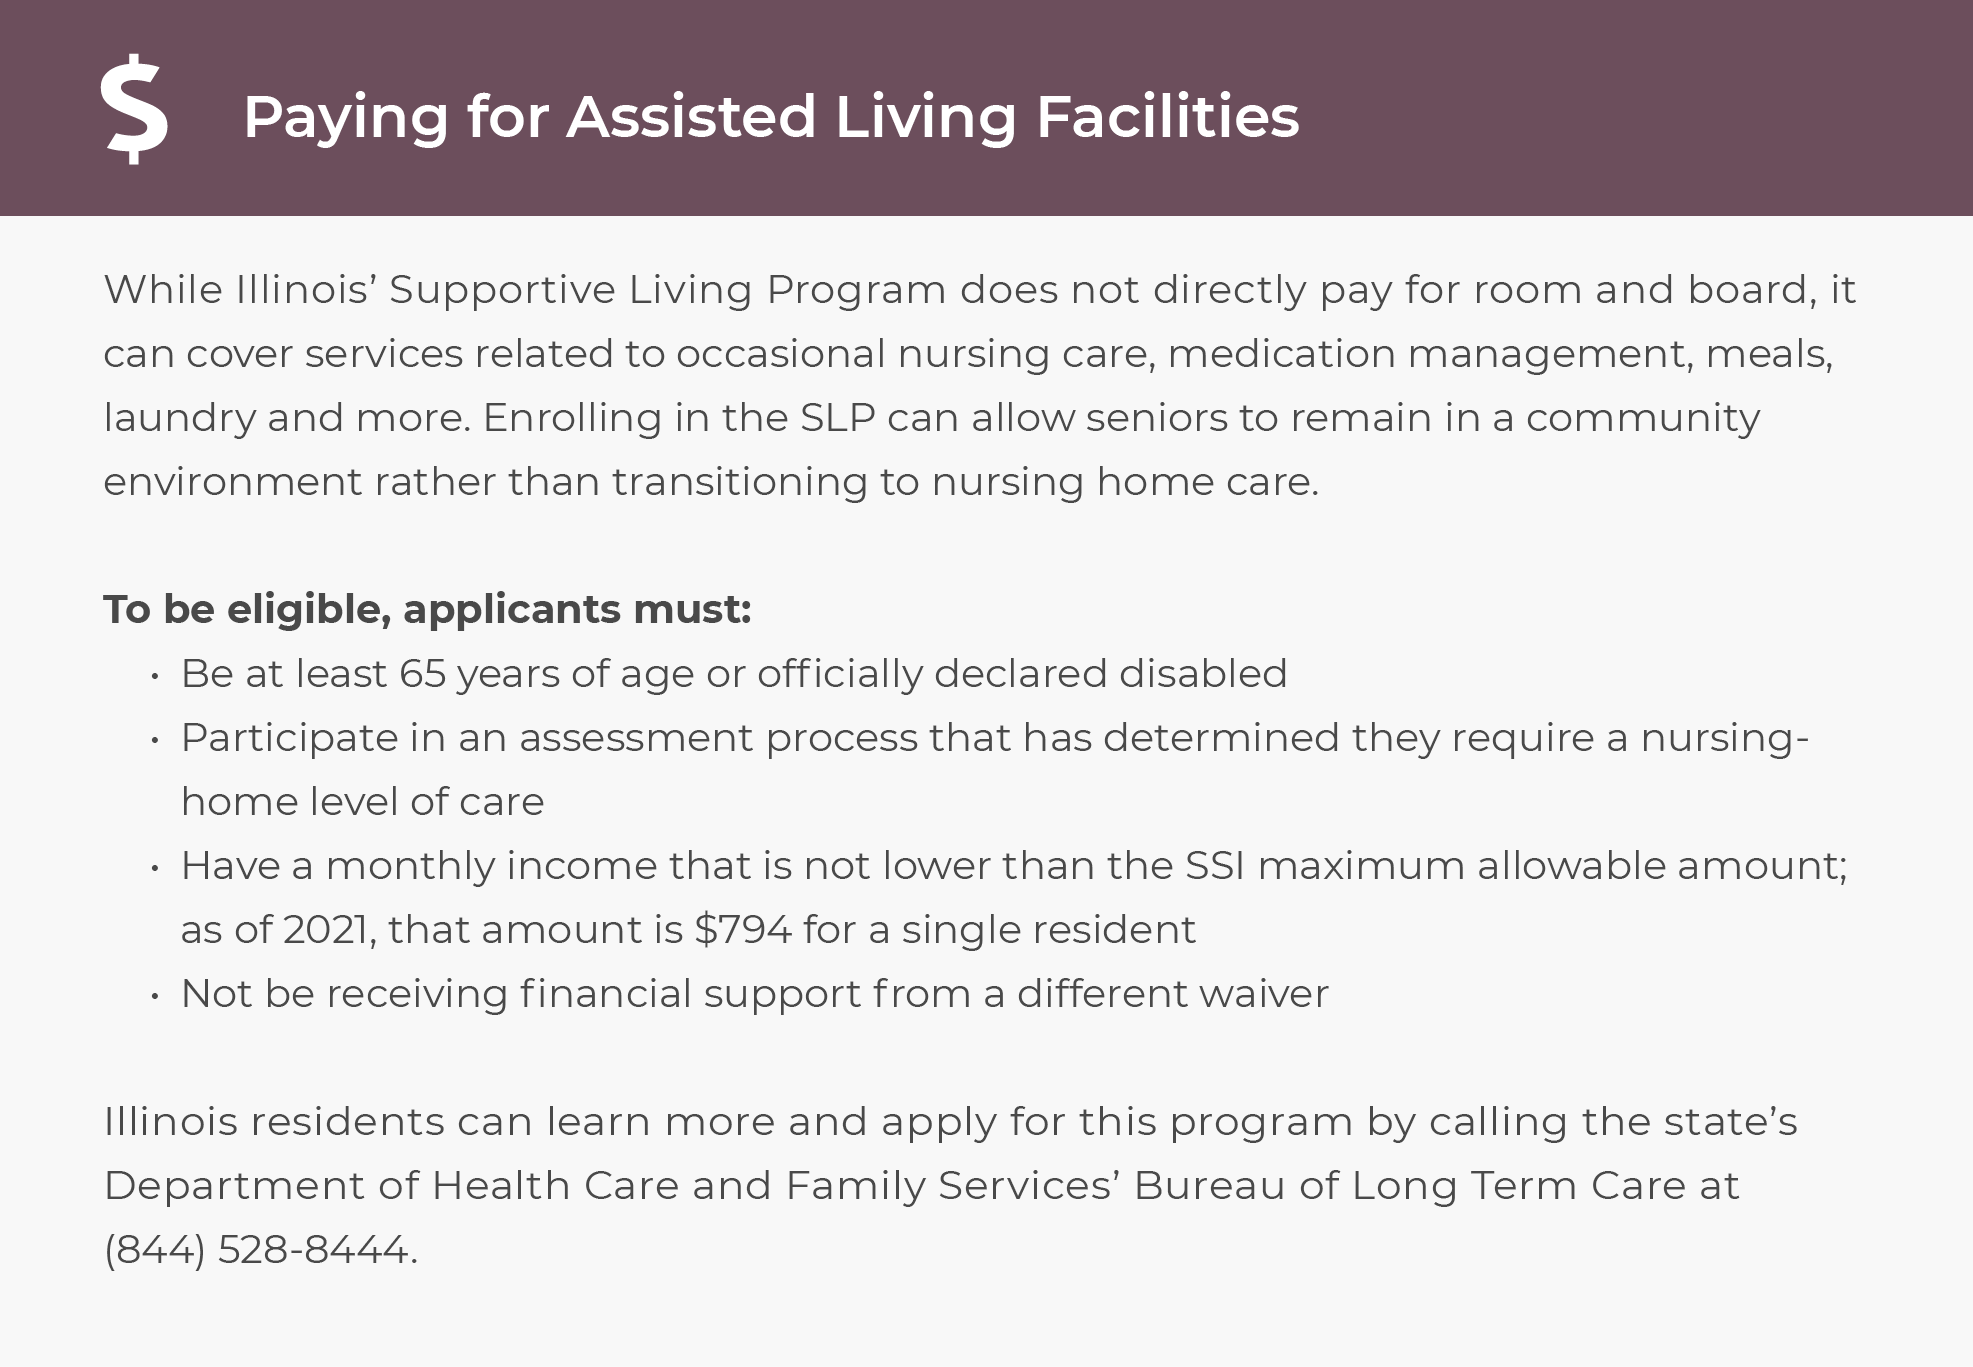 More ways to pay for assisted living in Illinois